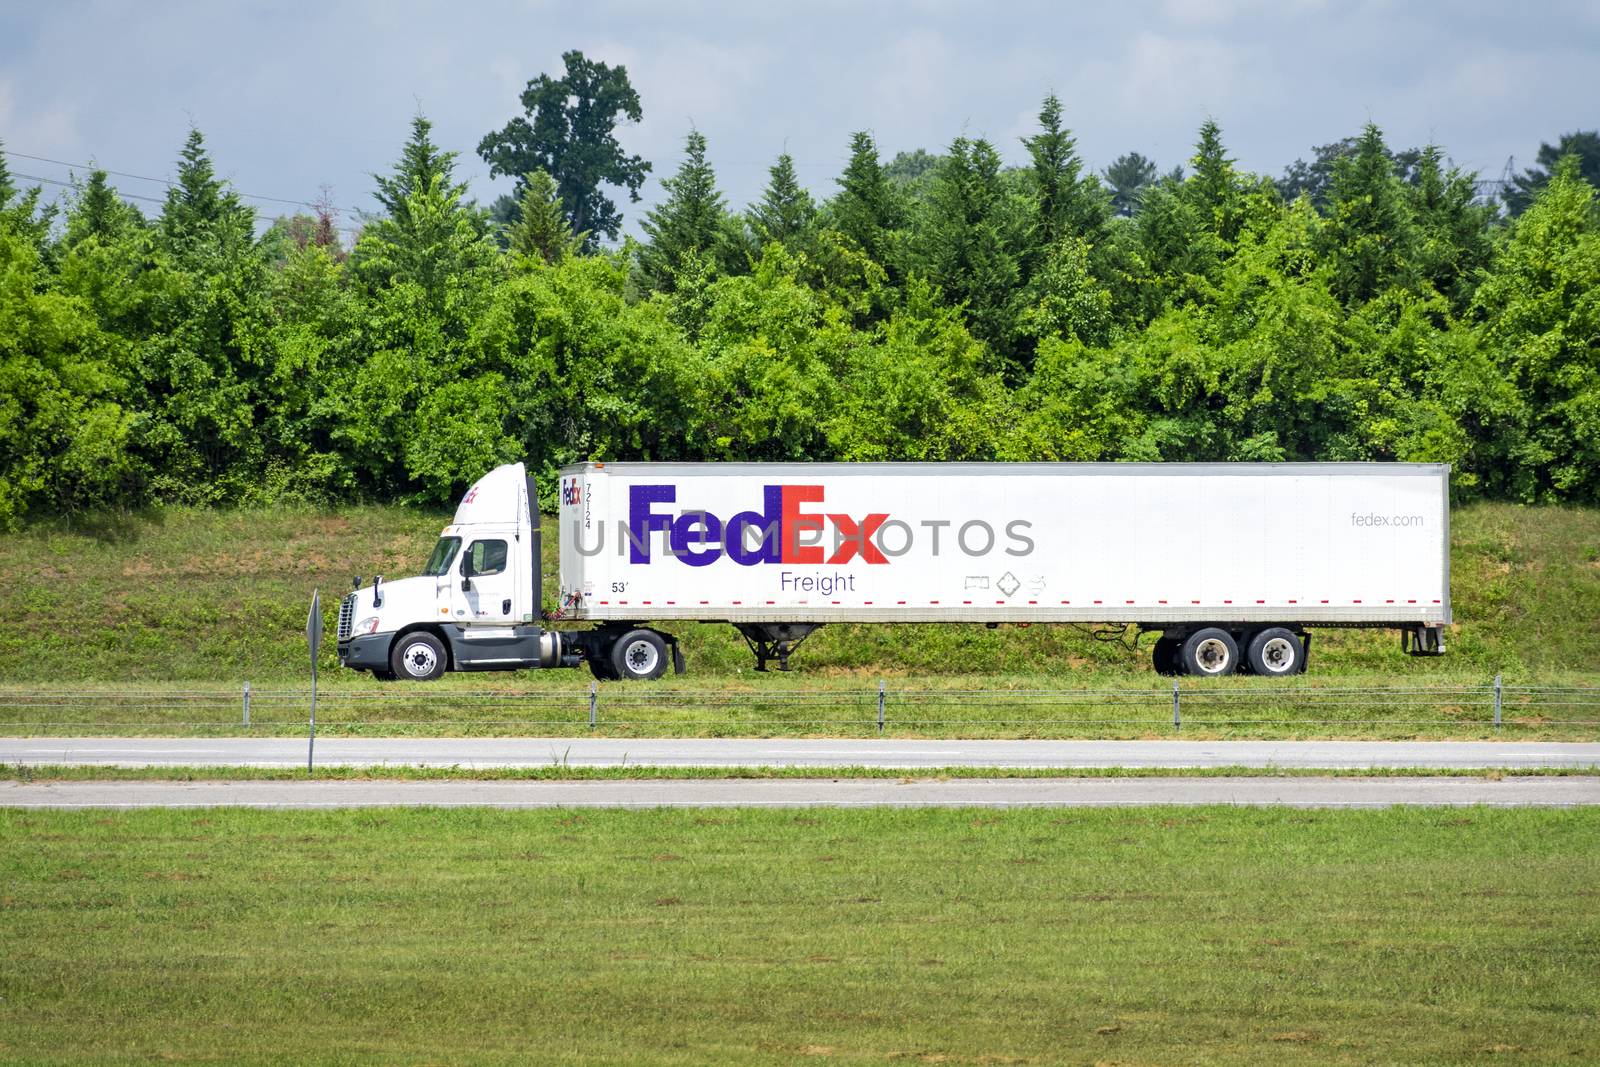 FedEx 18-Wheeler Delivering A Shipment In Tennessee (editorial) by stockbuster1